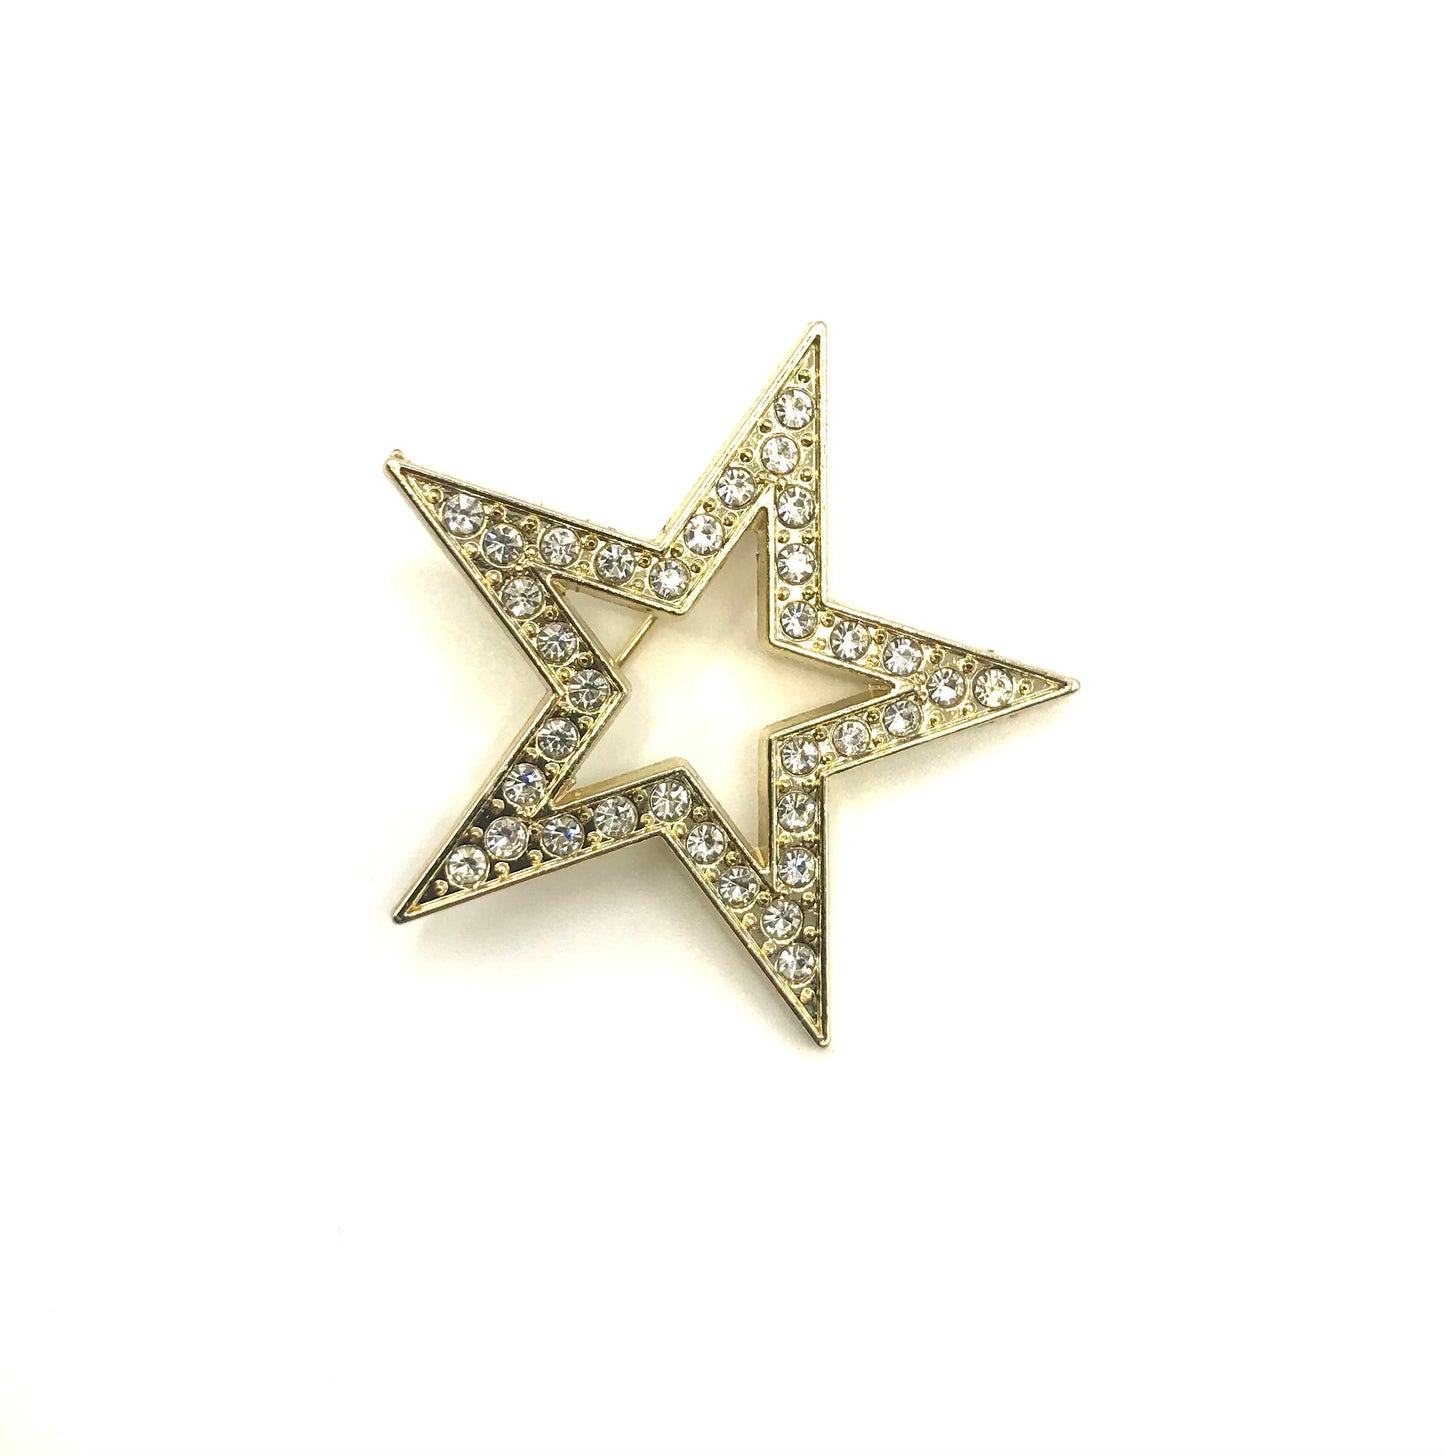 Bejewelled Star Pin